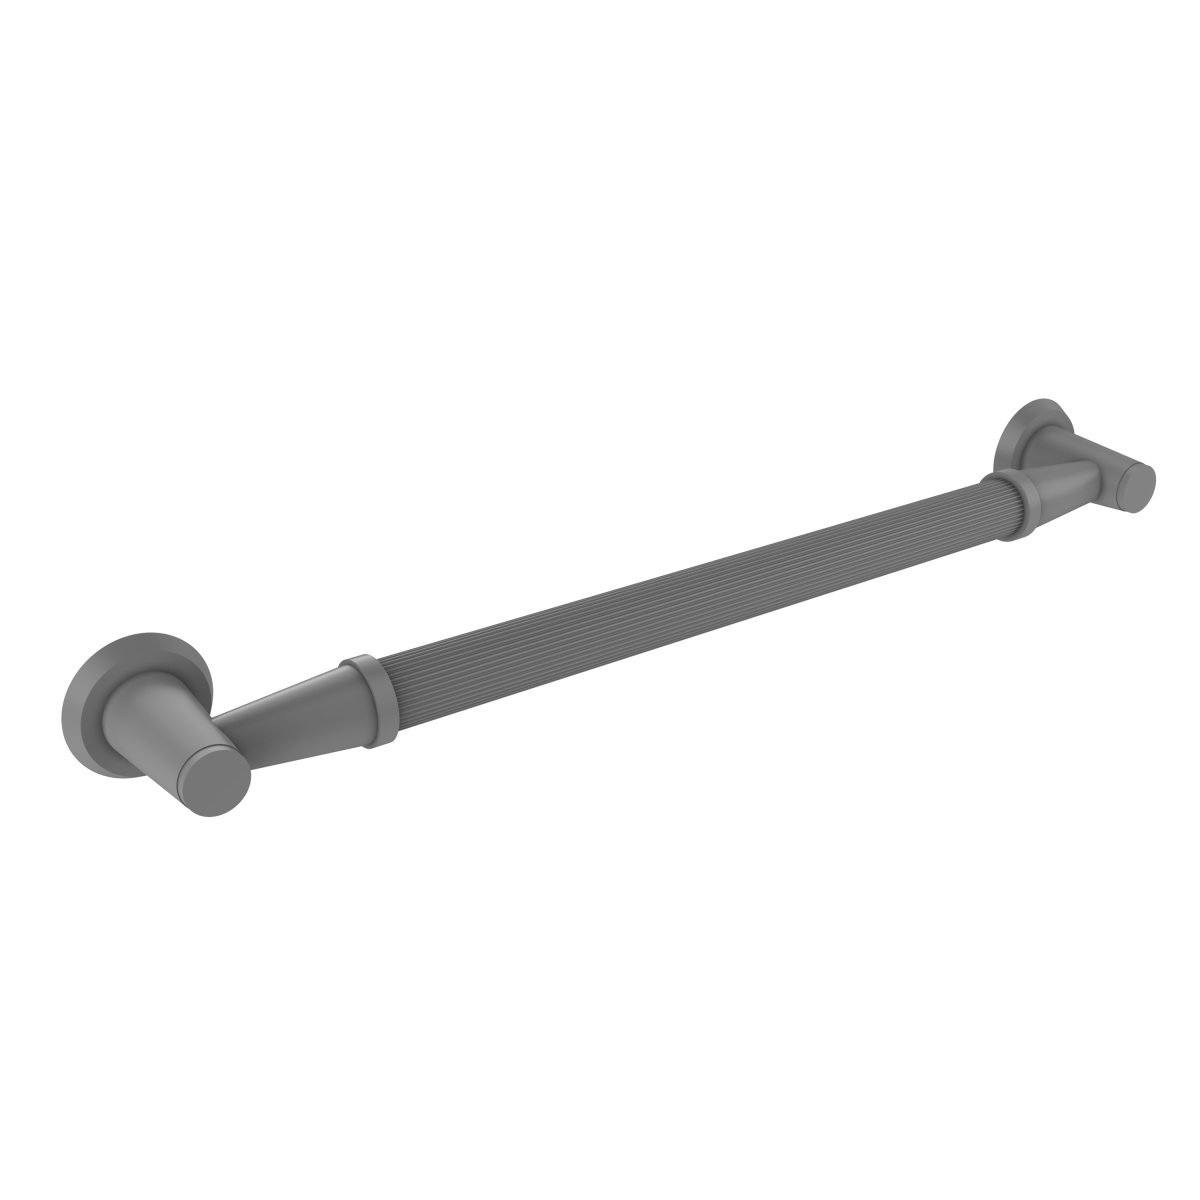 Picture of Allied Brass MD-GRR-16-GYM 16 in. Reeded Grab Bar, Matte Gray - 3.5 x 18 x 16 in.